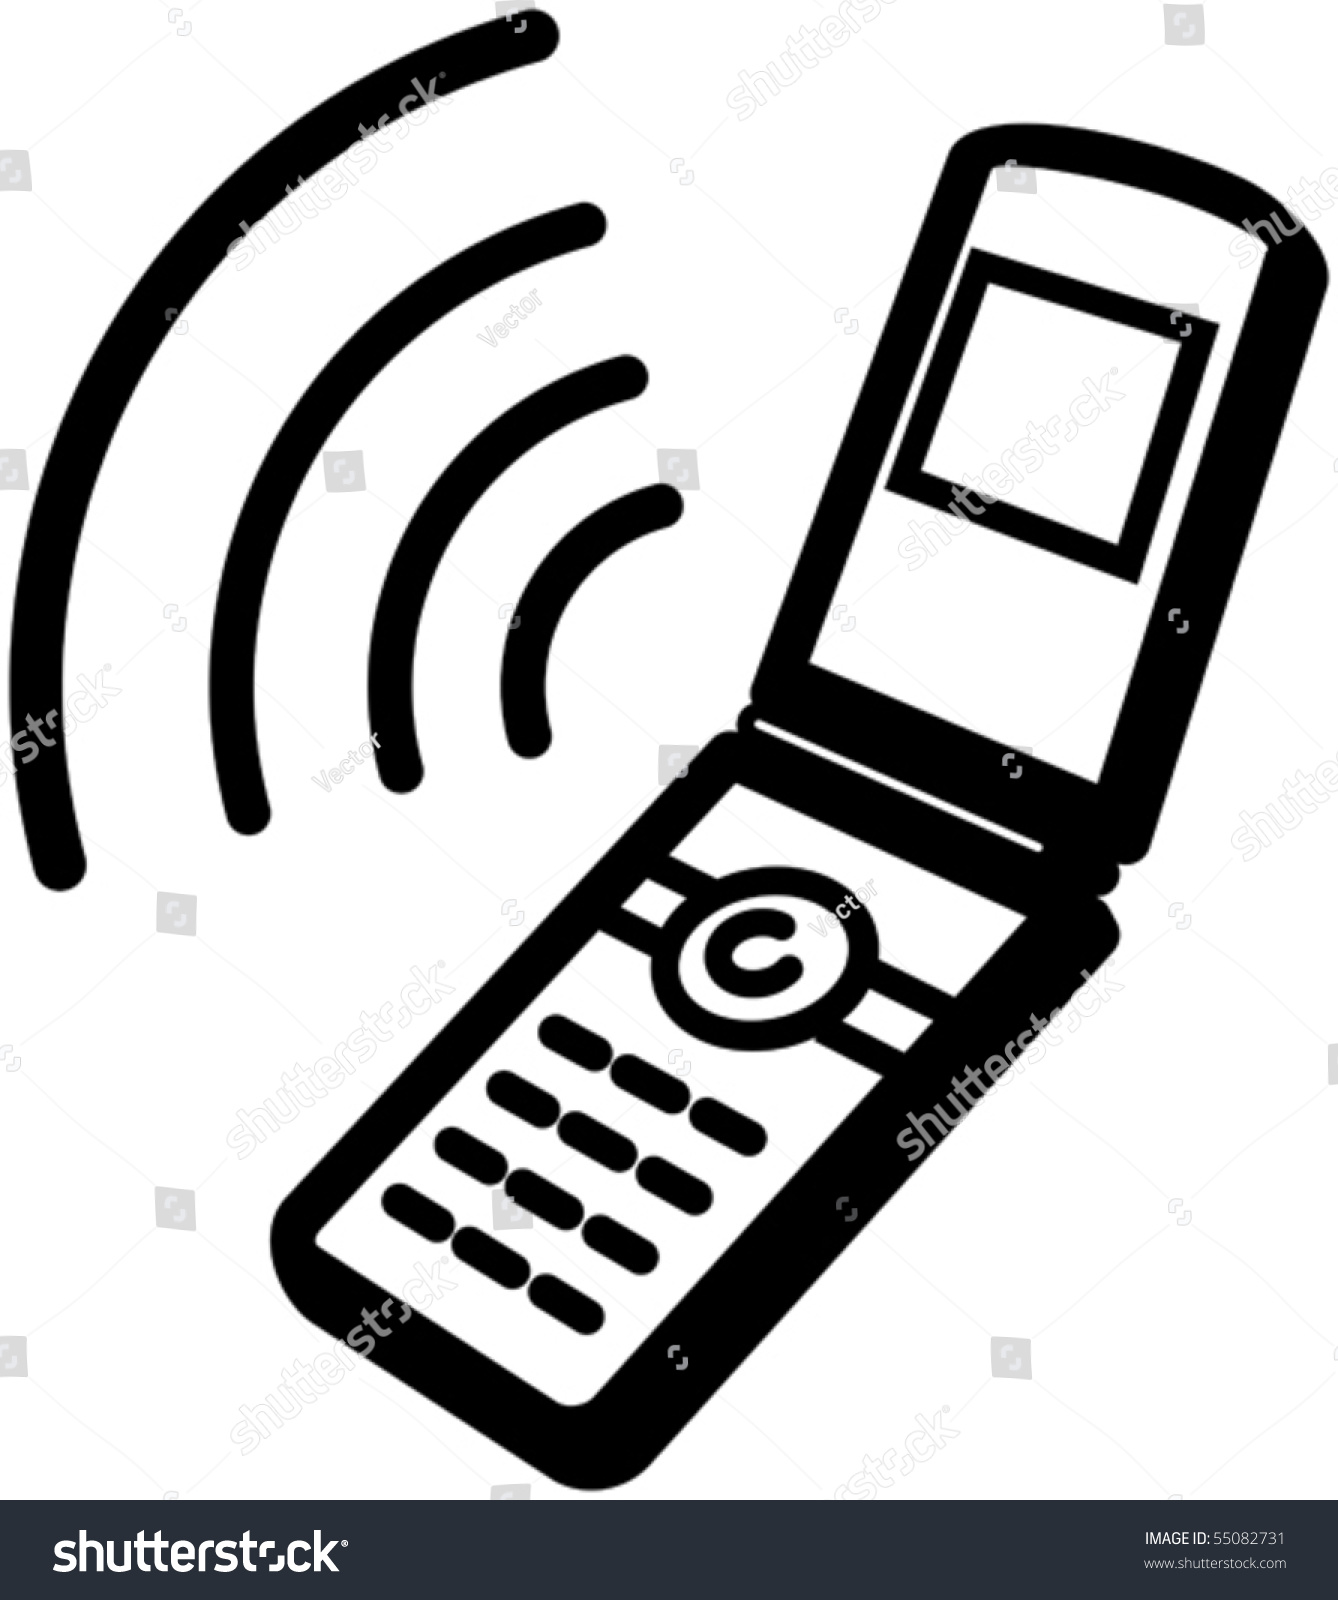 mobile phone clipart black and white - photo #28